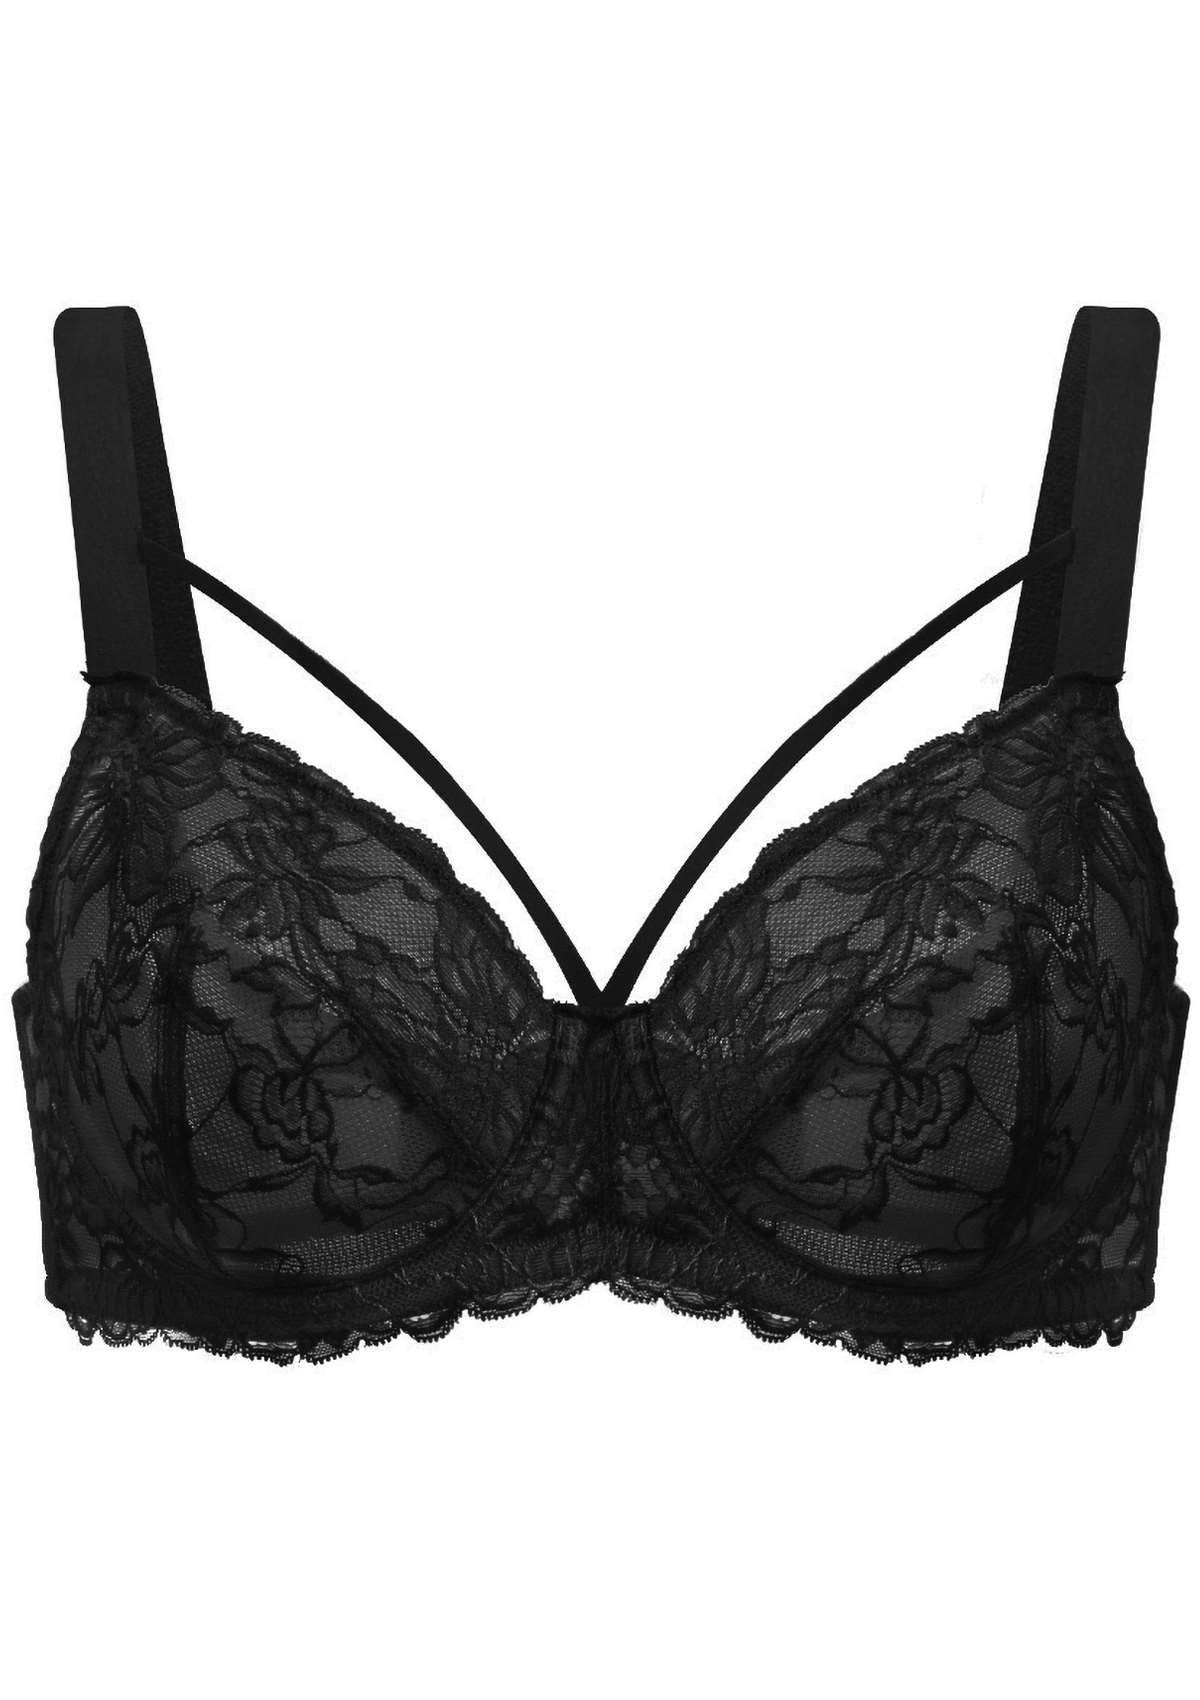 HSIA Pretty In Petals Bra - Plus Size Lingerie For Comfrot And Support - Black / 42 / H